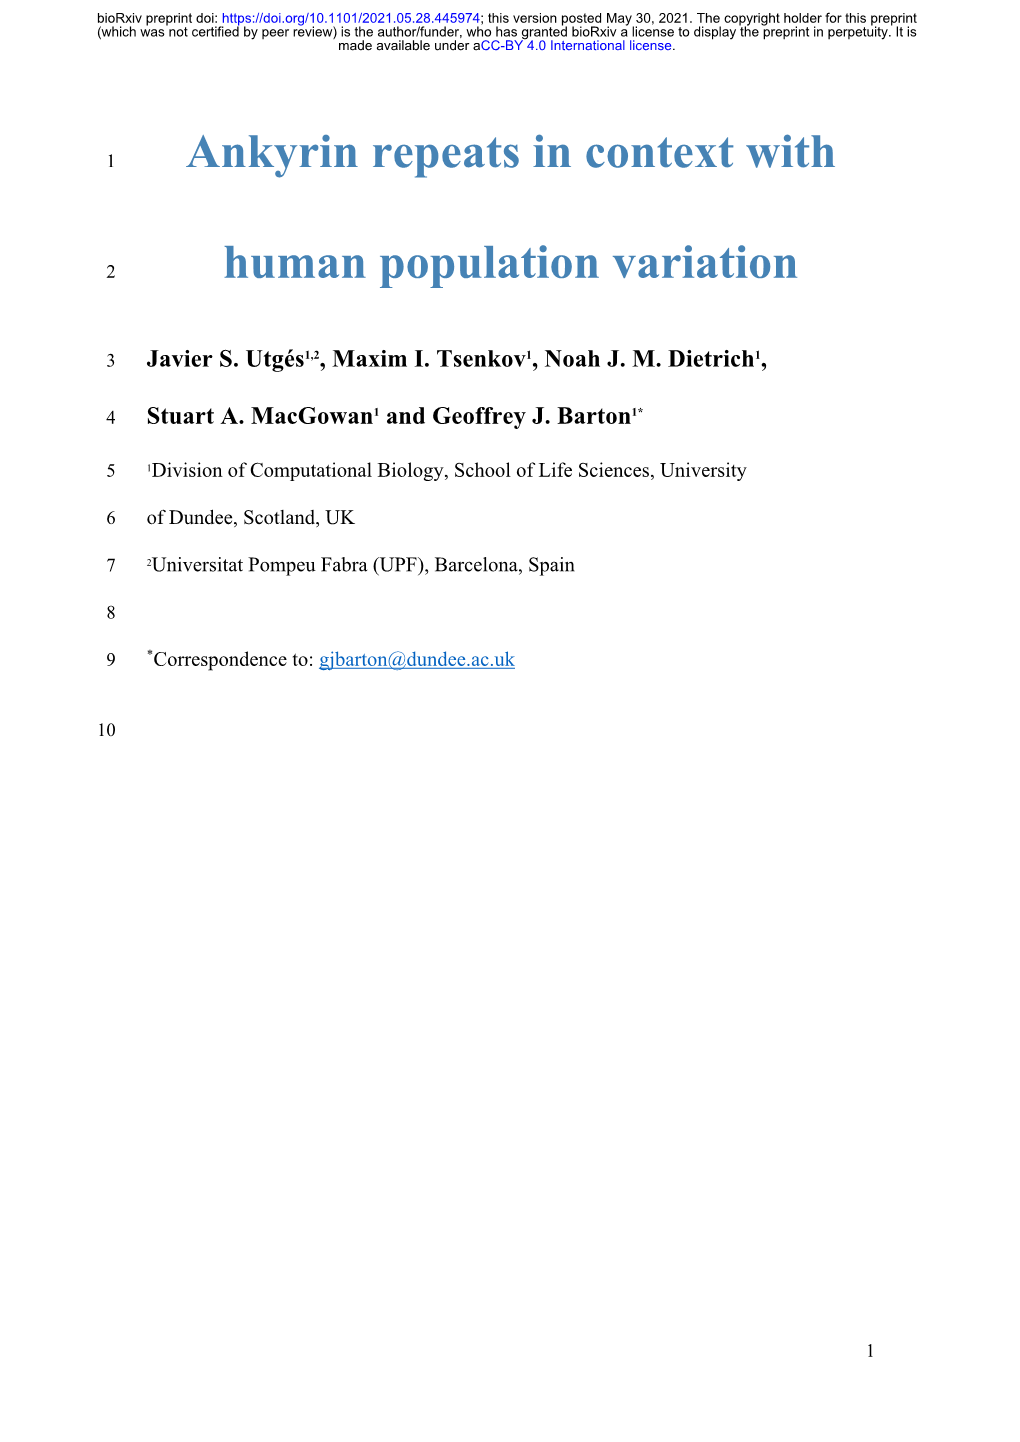 Ankyrin Repeats in Context with Human Population Variation